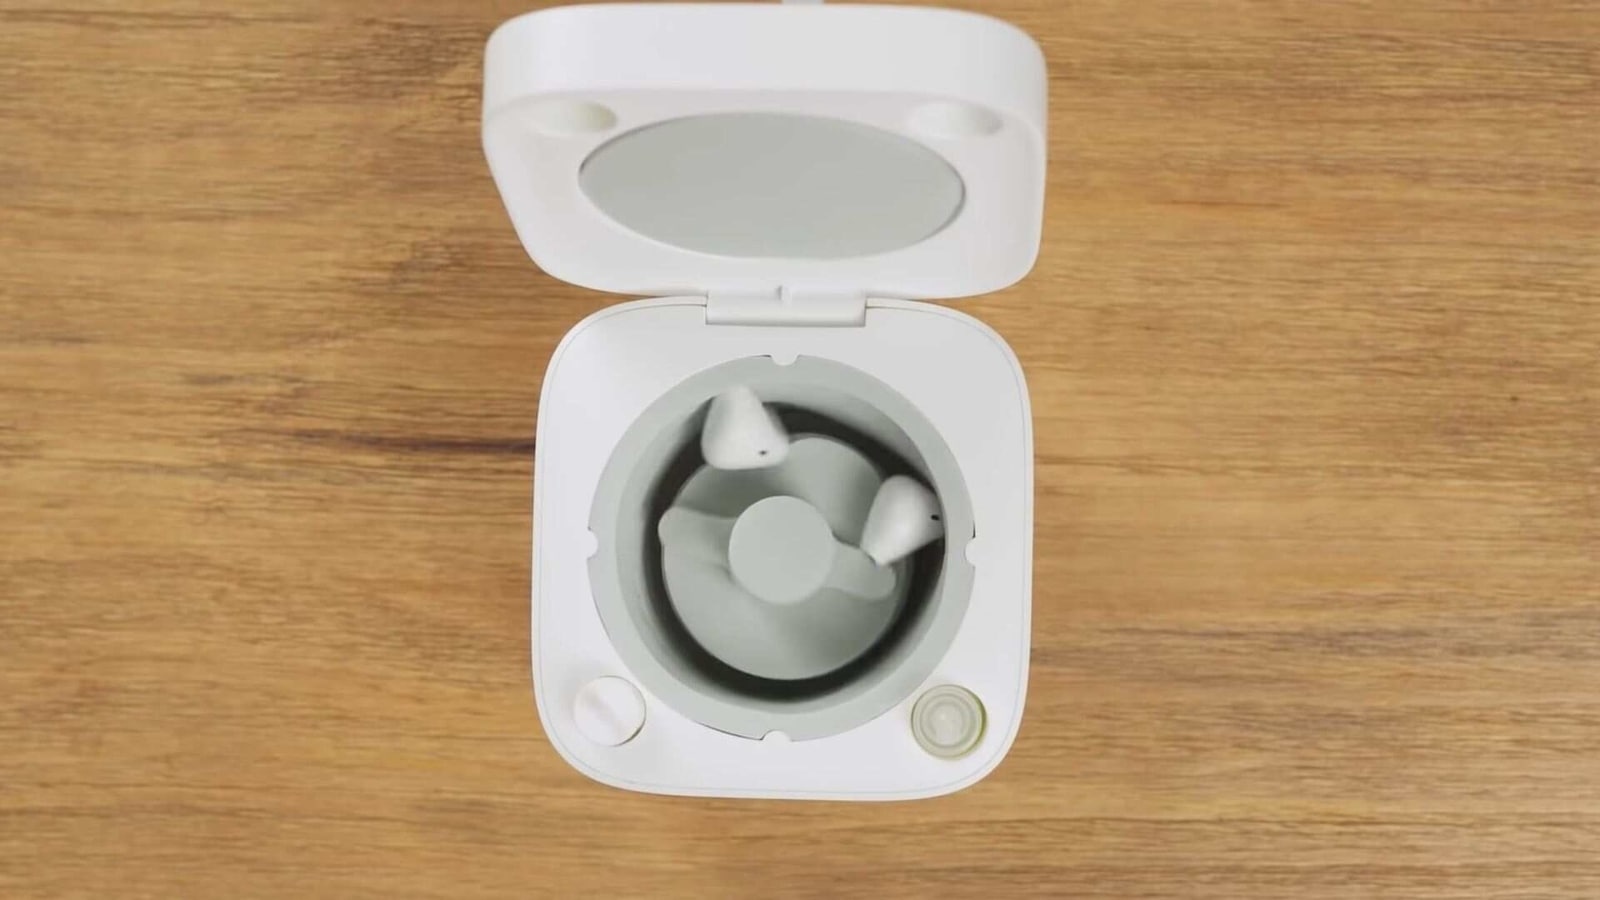 AirPods need cleaning? Here's a | Wearables News